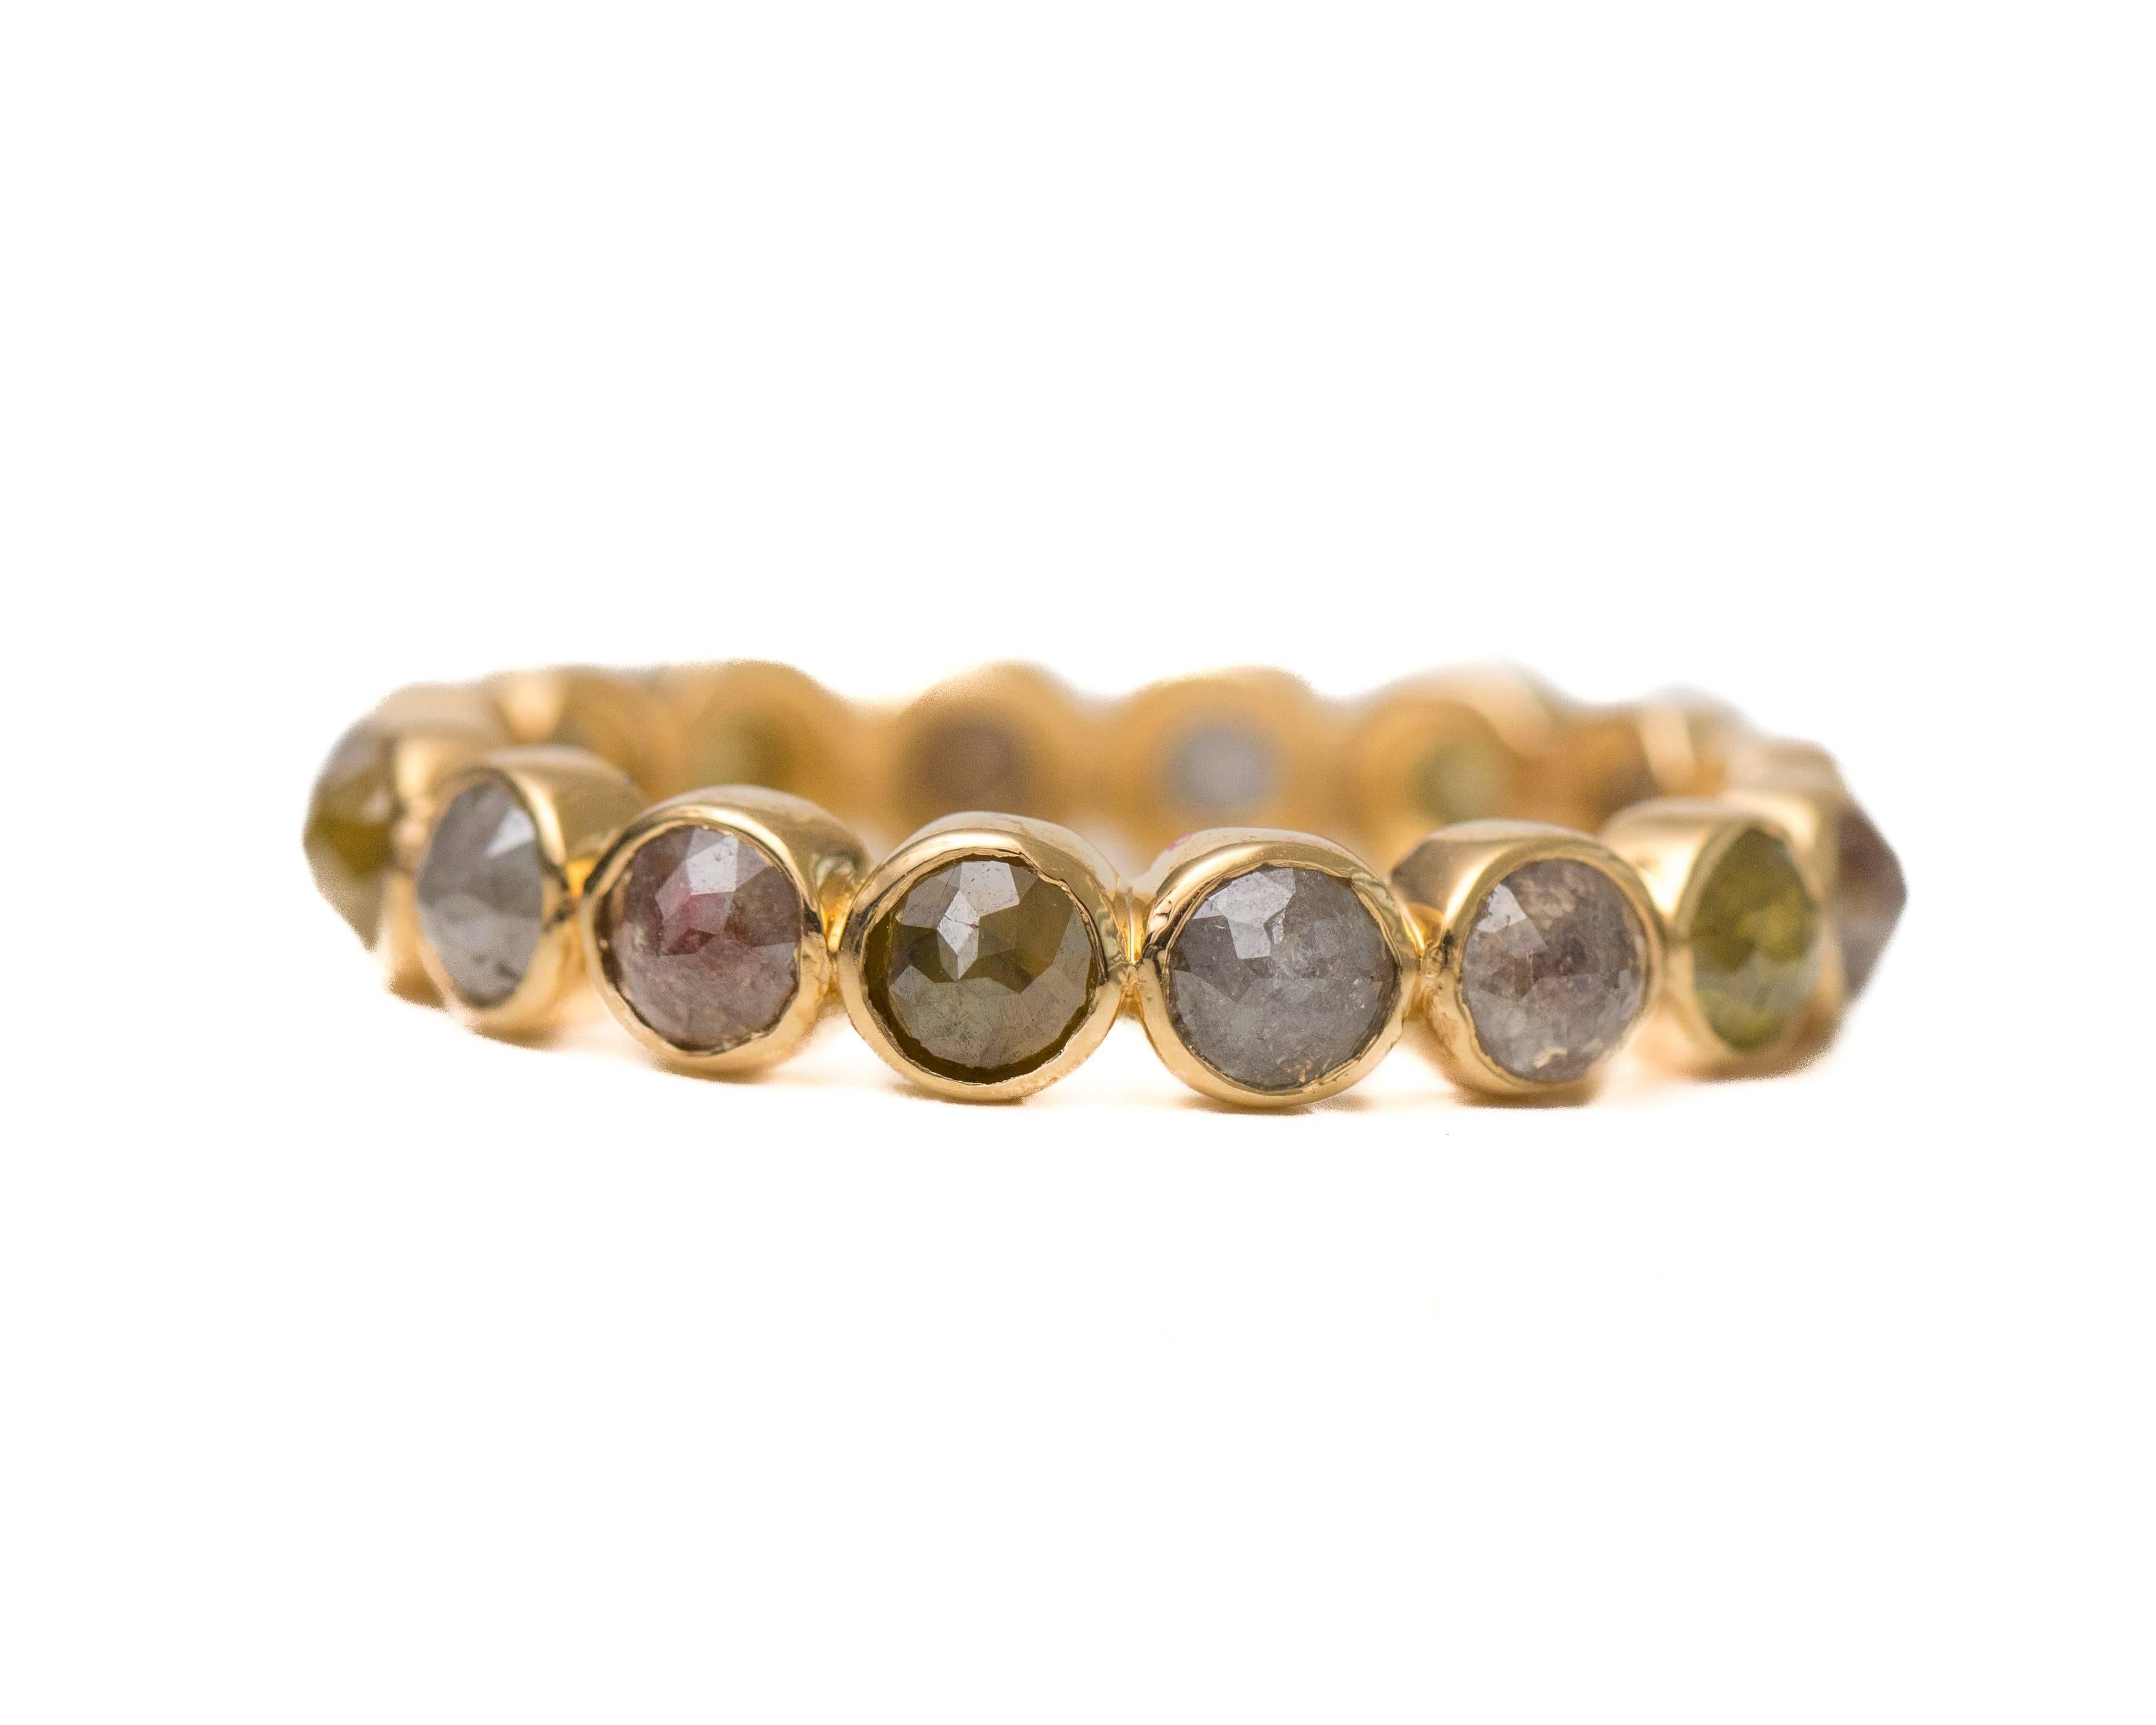 2.0 Carat Rose cut Diamond and 18 Karat Yellow Gold Eternity Band

Features a ring of fancy intense Rose Cut Diamonds in 18 Karat Yellow Gold. The Rose Cut gemstones are bezel set in 18 Karat Yellow Gold. The sides of the ring have a smooth, high